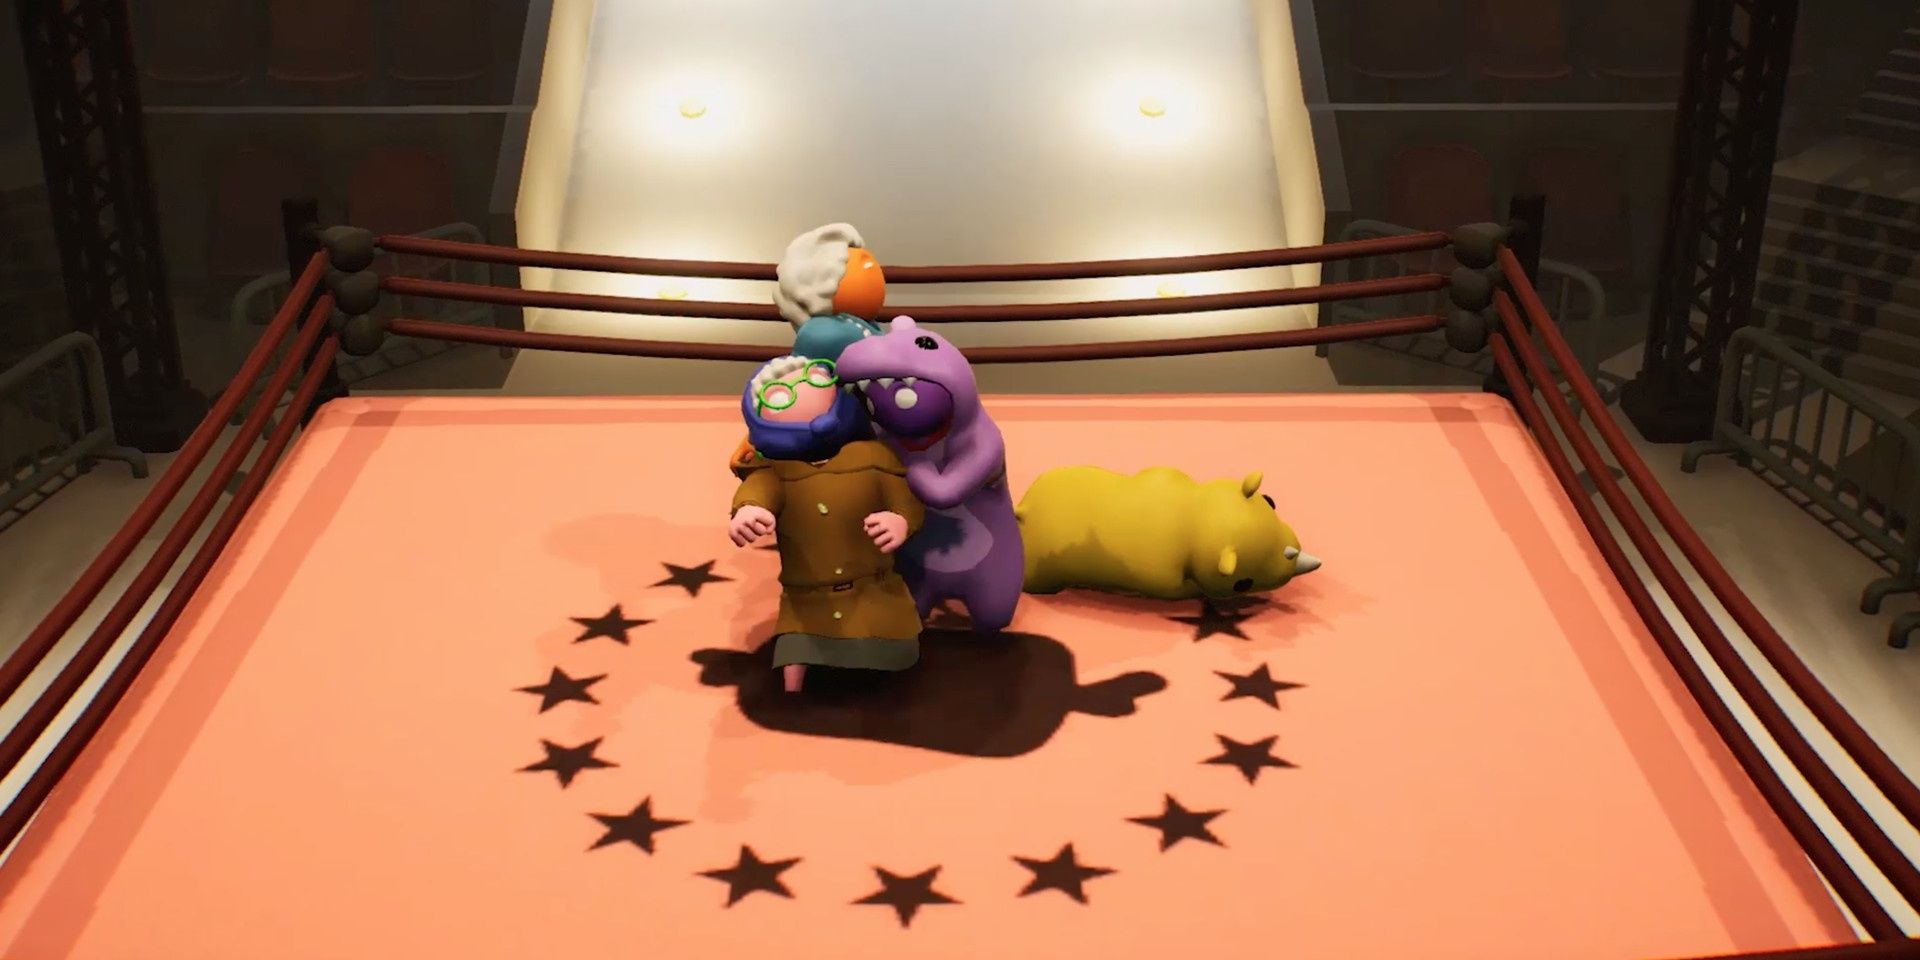 Players duking it out in the wrestling ring in Gang Beasts